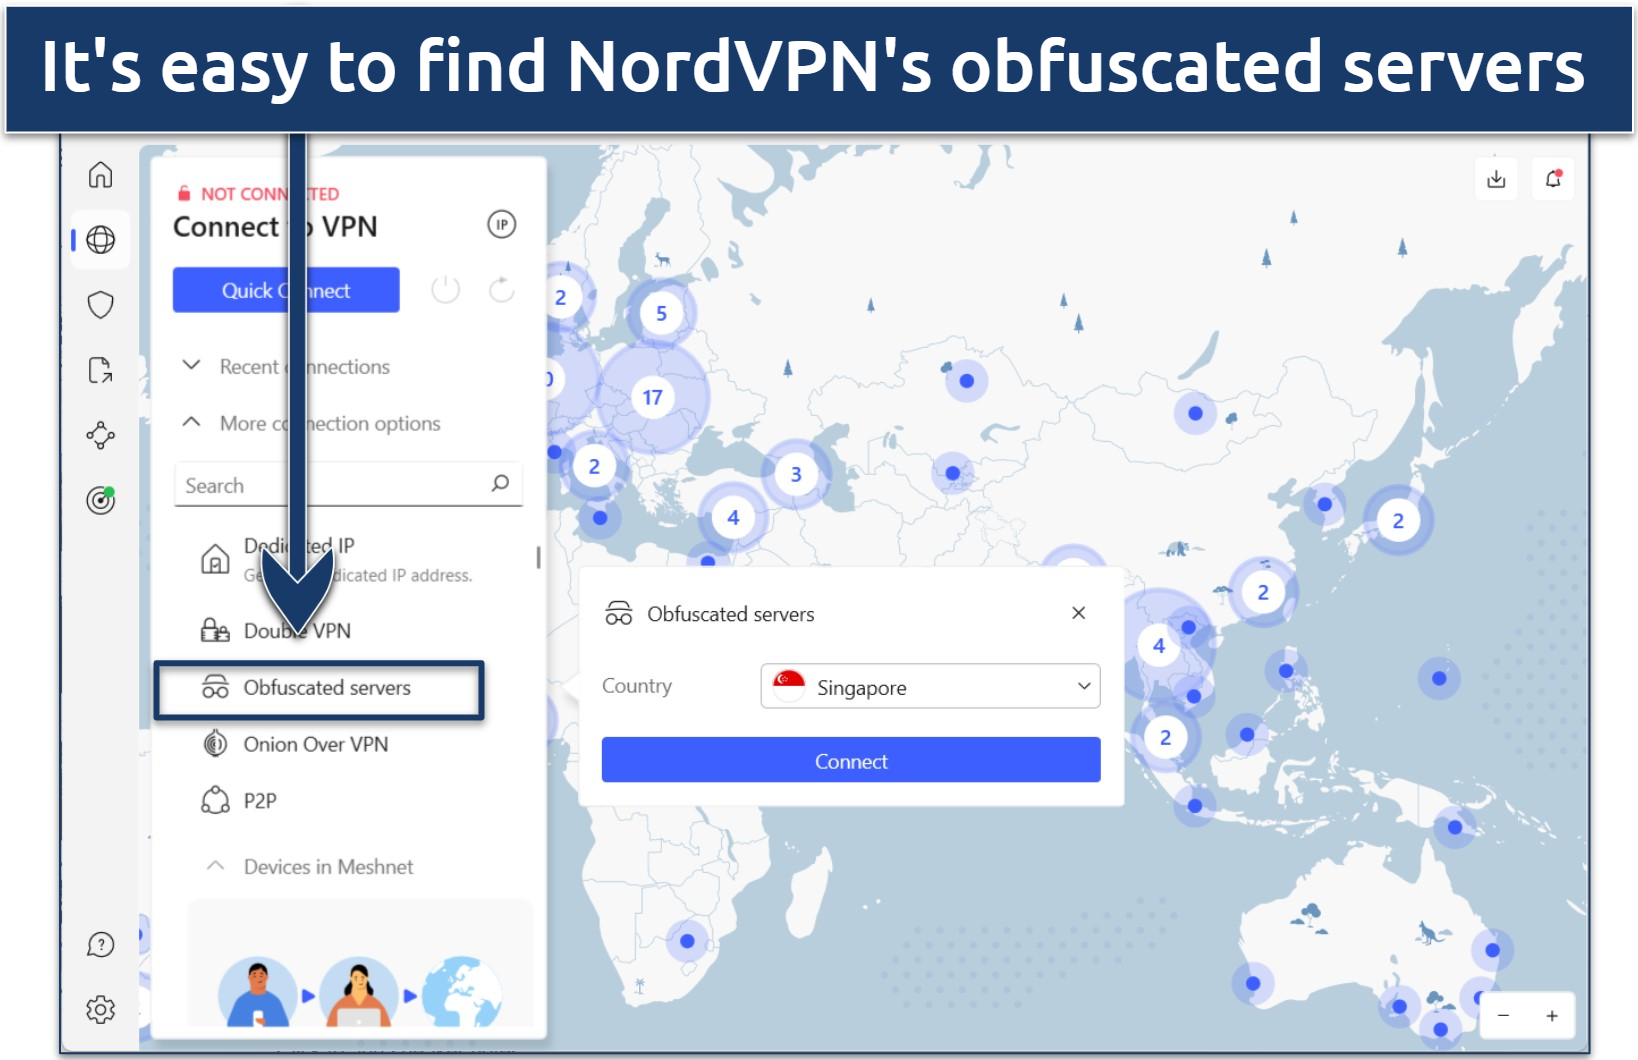 Screenshot showing how to choose NordVPN's obfuscated servers